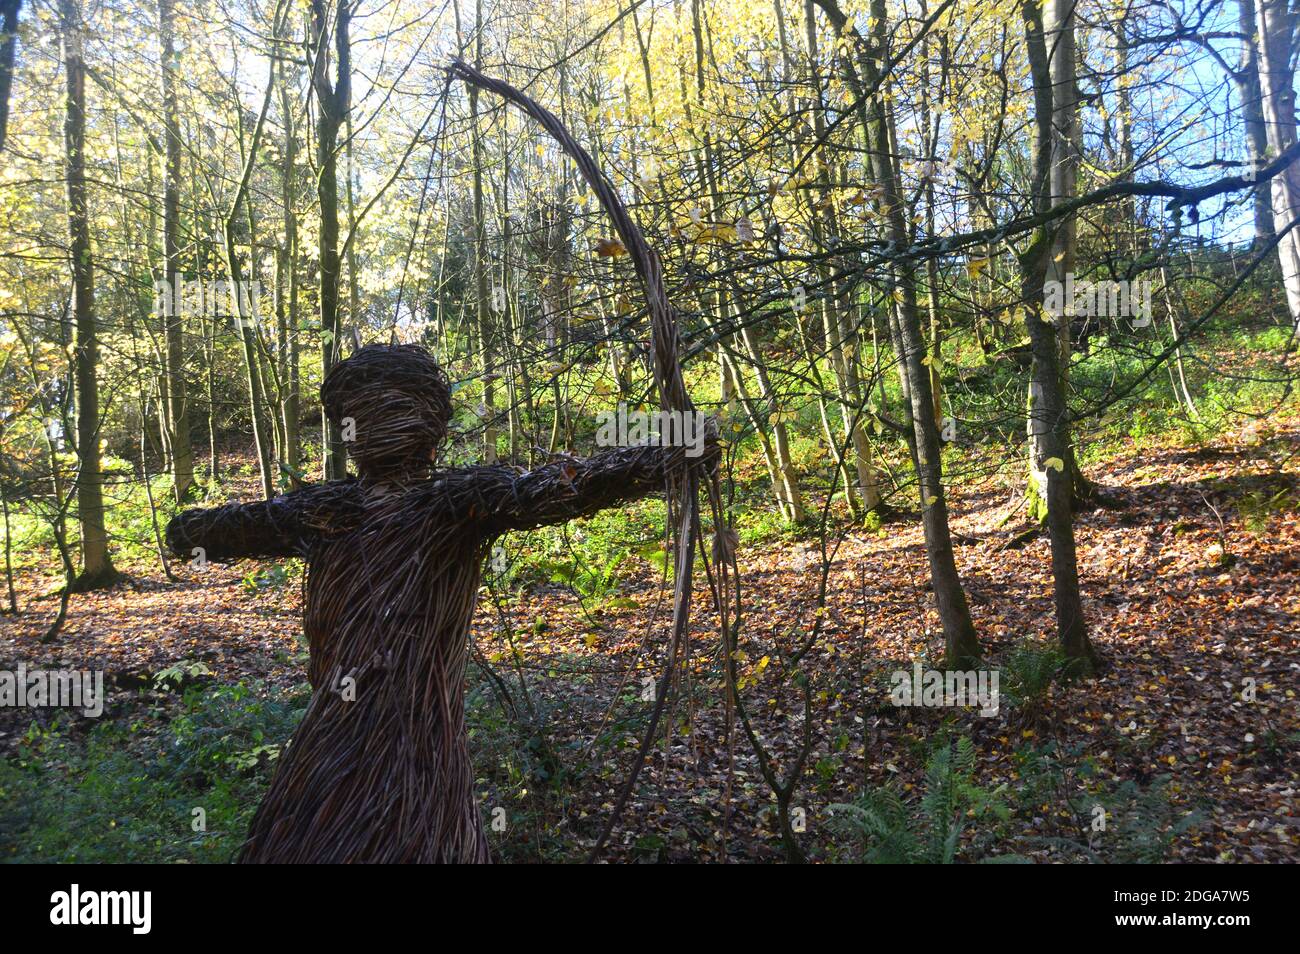 Willow Sculpture of Woman Archer 'Spirit of the Medieval Huntress' par Anna and the Willow, Skipton Woods, Skipton, North Yorkshire, Angleterre, Royaume-Uni. Banque D'Images